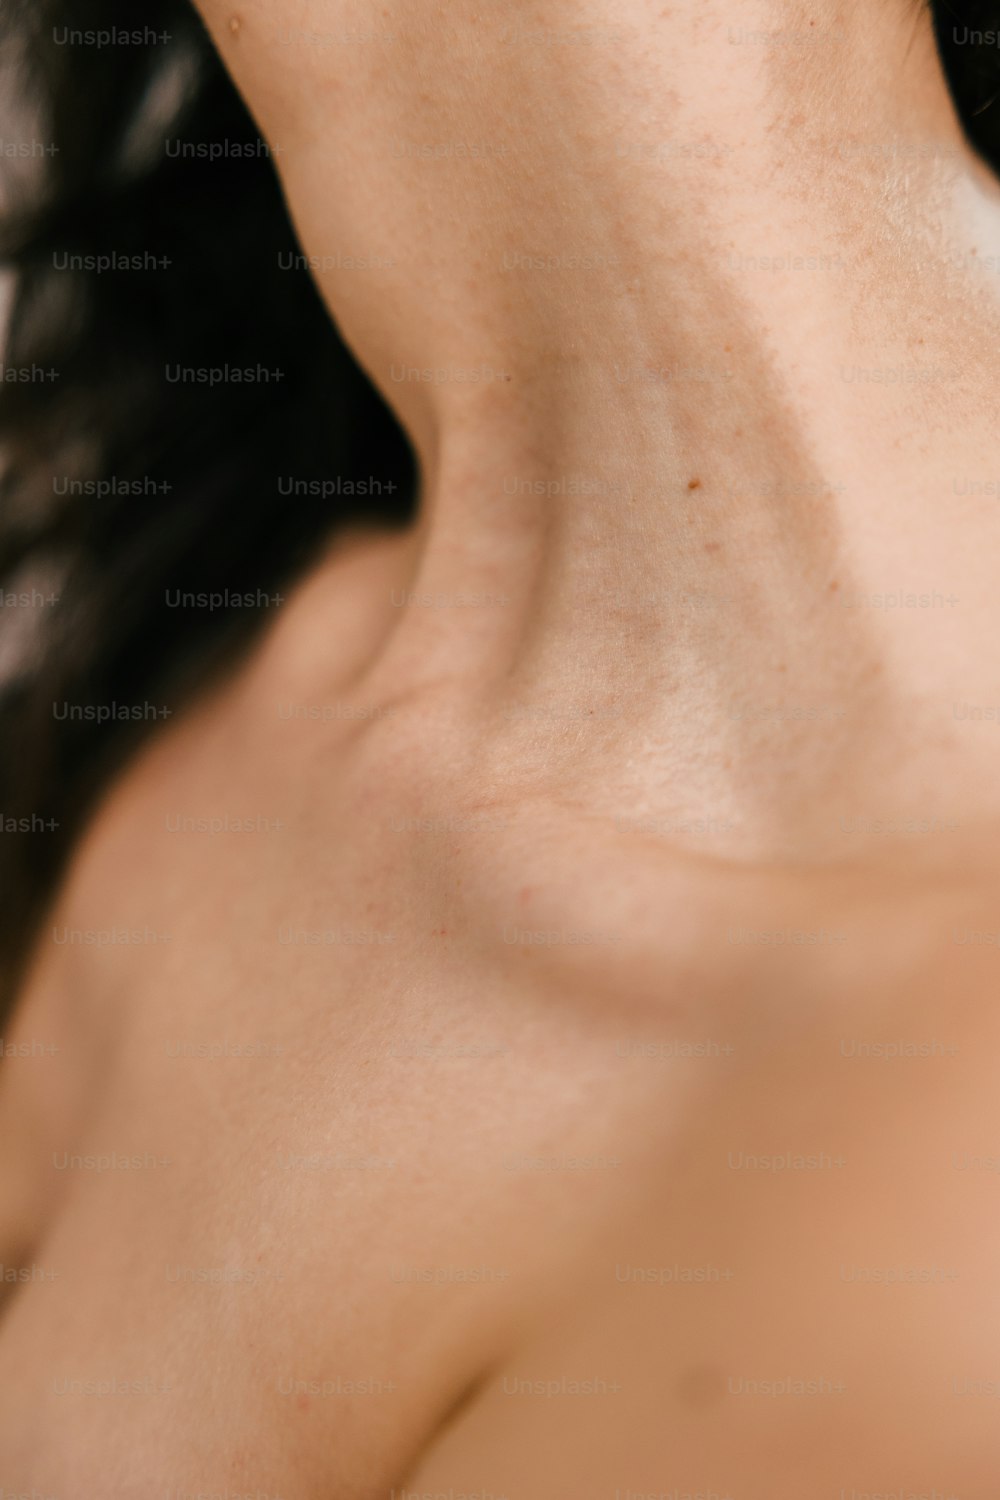 a close up of a person's neck and neck